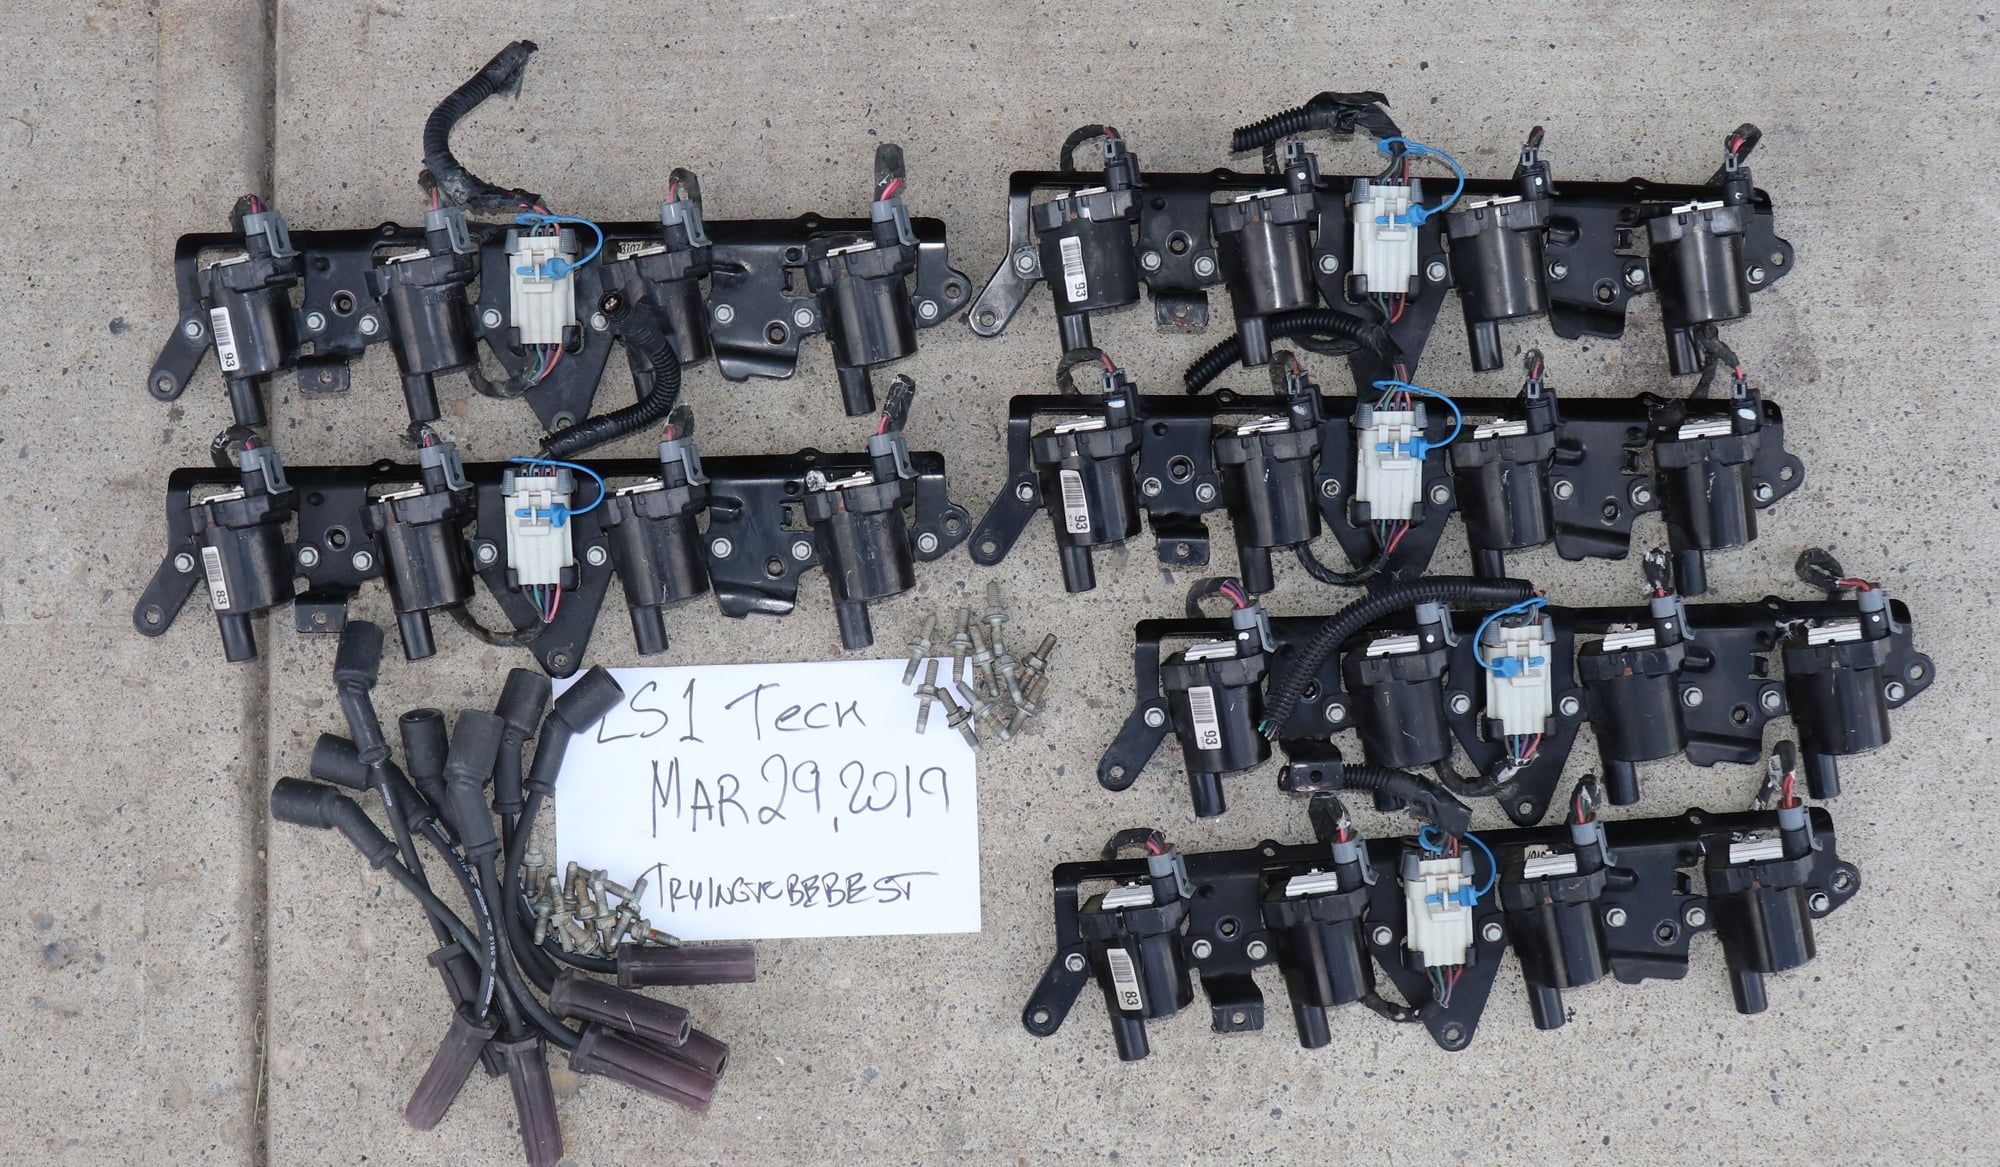  - FS: D585 Truck coils/coil pack, Ignition Coils - Calgary, AB T2Y3X4, Canada